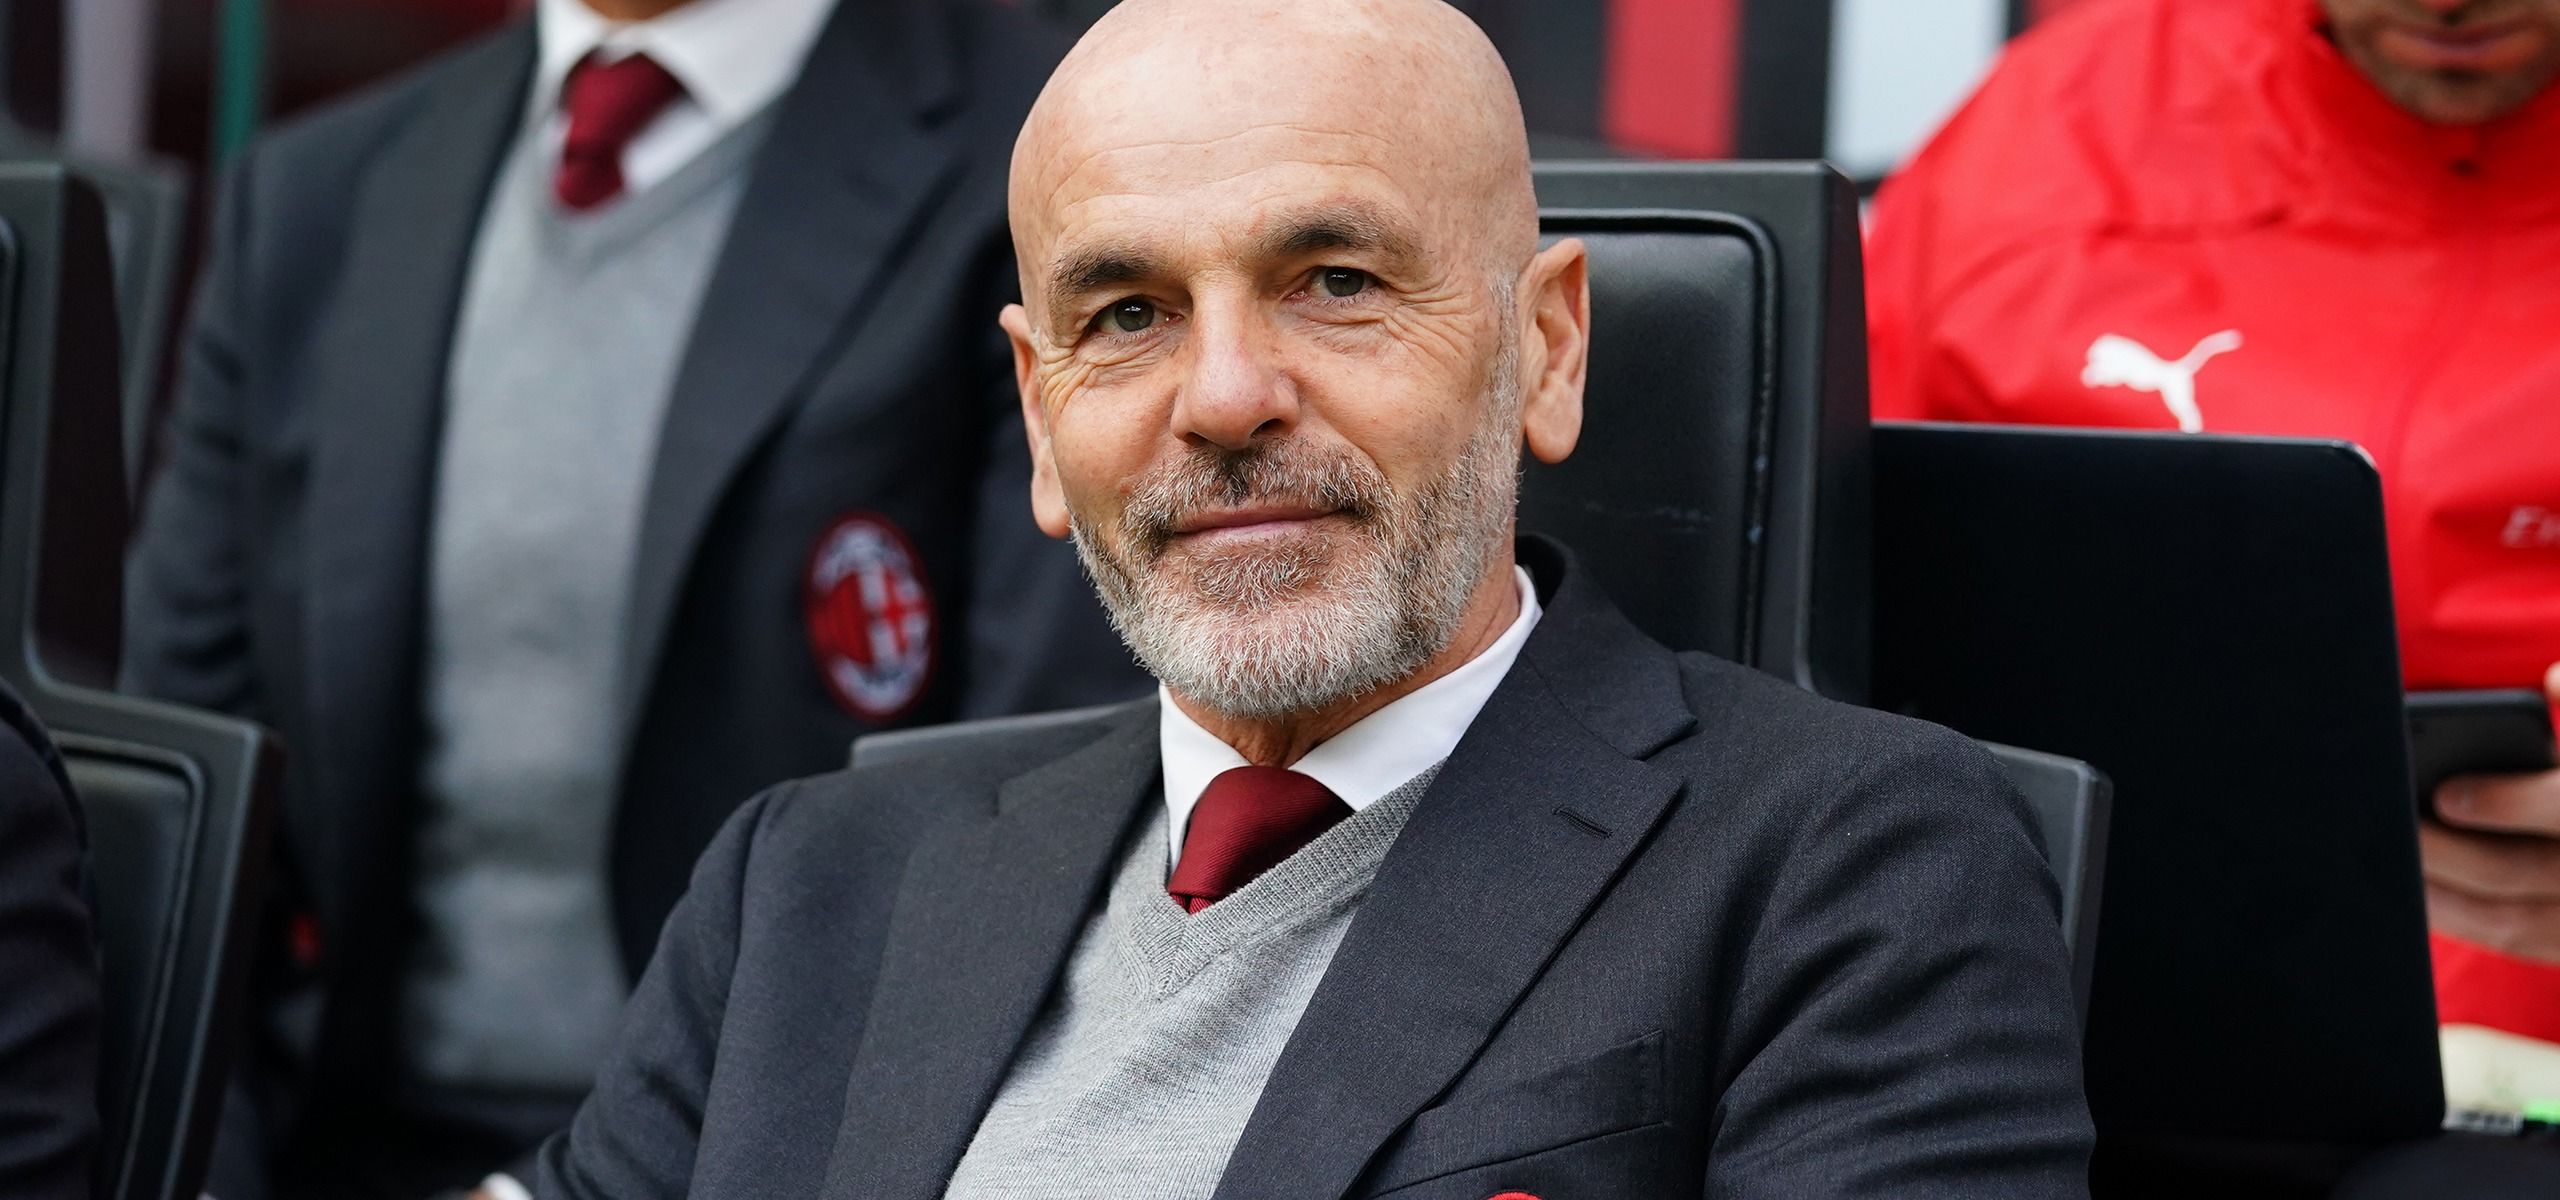 Stefano Pioli to Leave AC Milan Coaching Position After Season Ends